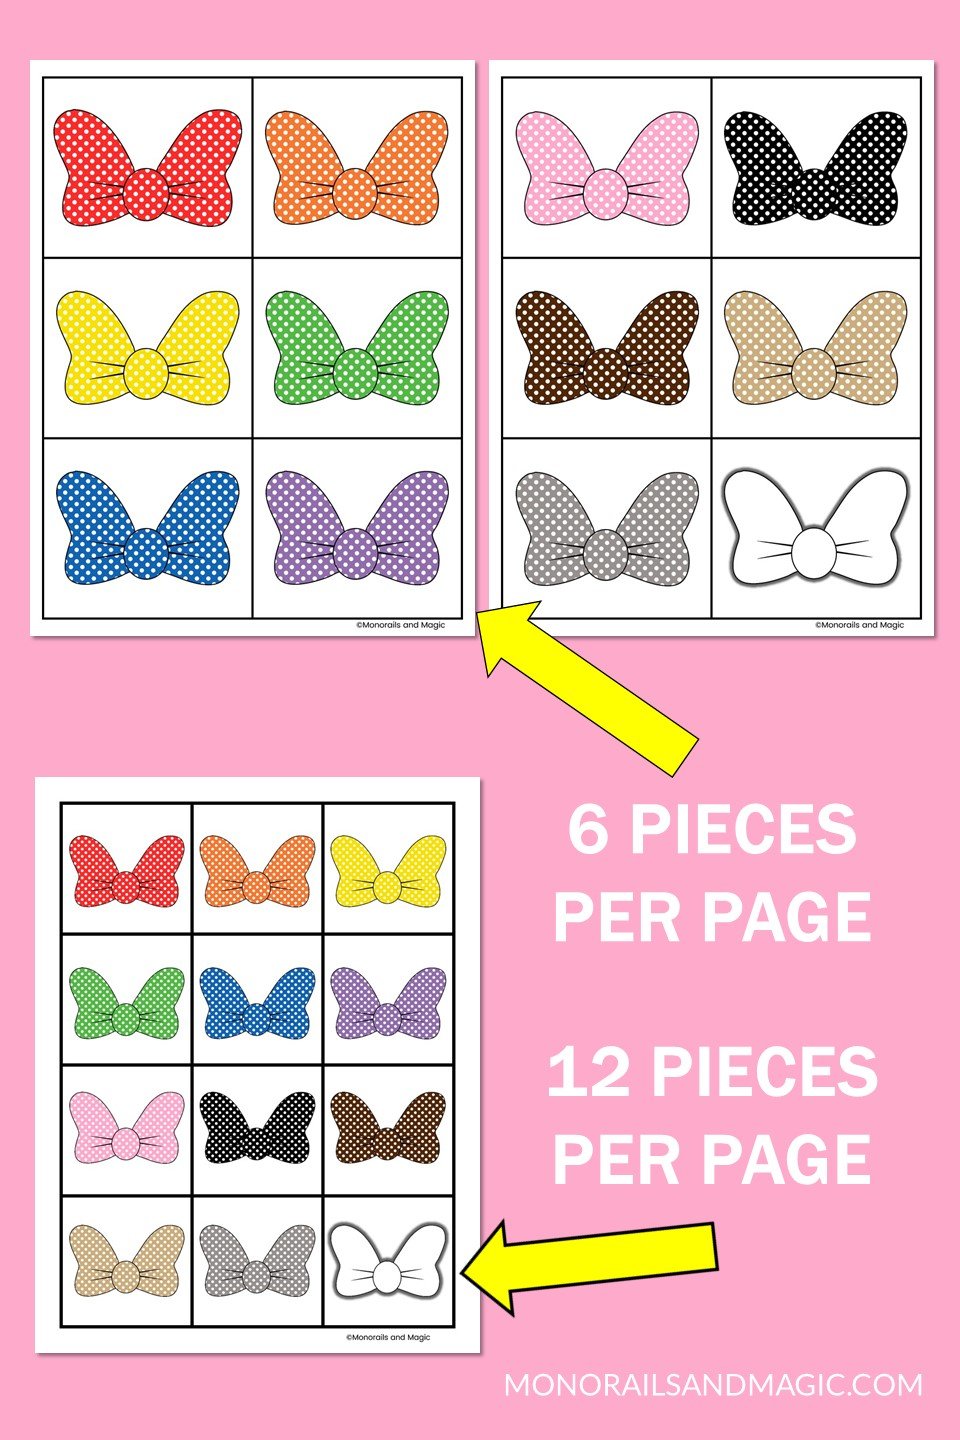 Free printable Minnie Mouse bow colors memory game for kids.